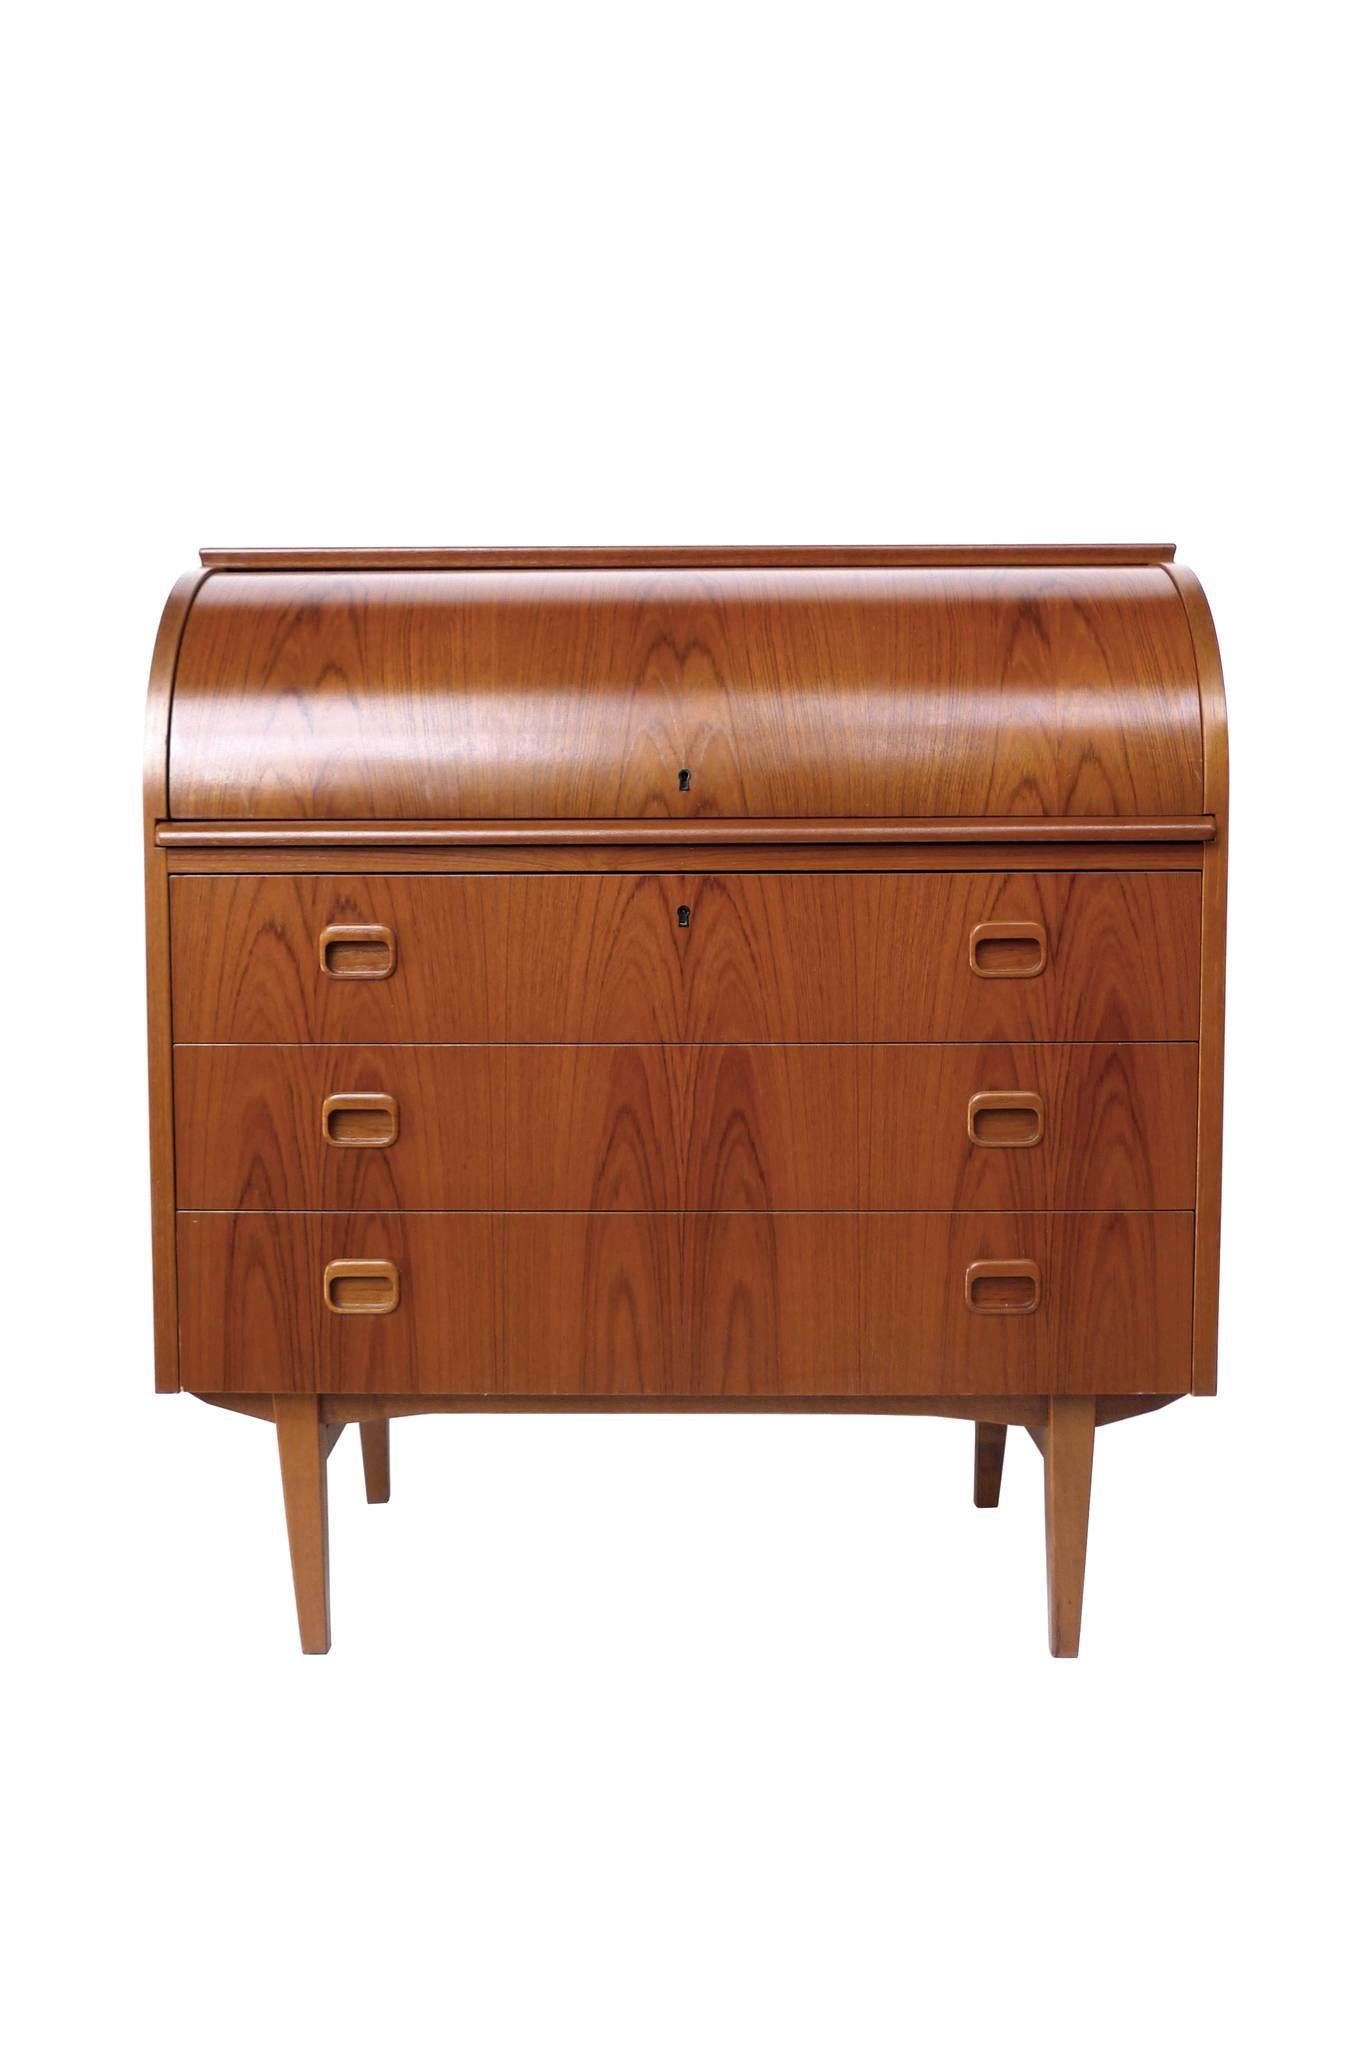 This Mid-Century Modern roll-top secretary desk is Danish design. It's crafted from rosewood and is comprised of a secretary desktop and a chest of drawers. There are three drawers for ample storage, which includes a functioning key. The roll-top